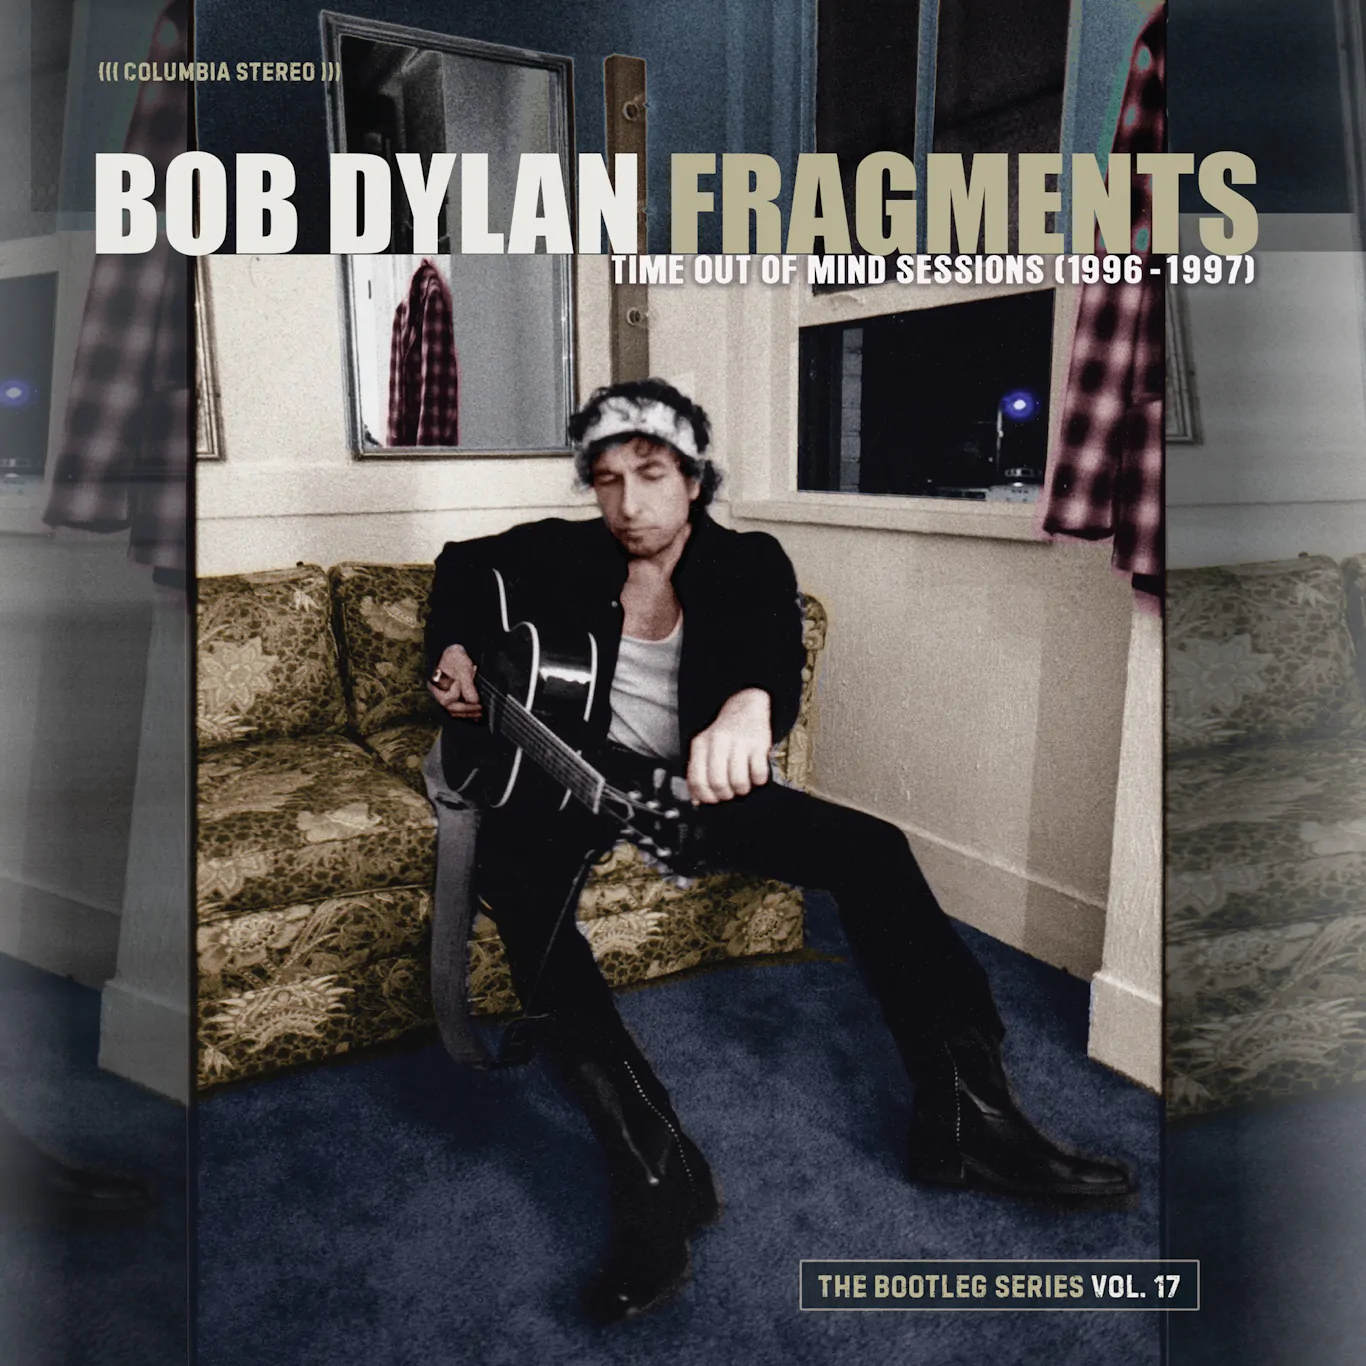 Columbia & Legacy Recordings announce details of Bob Dylan: Fragments – Time Out Of Mind Sessions (1996 – 1997): The Bootleg Series Vol. 17